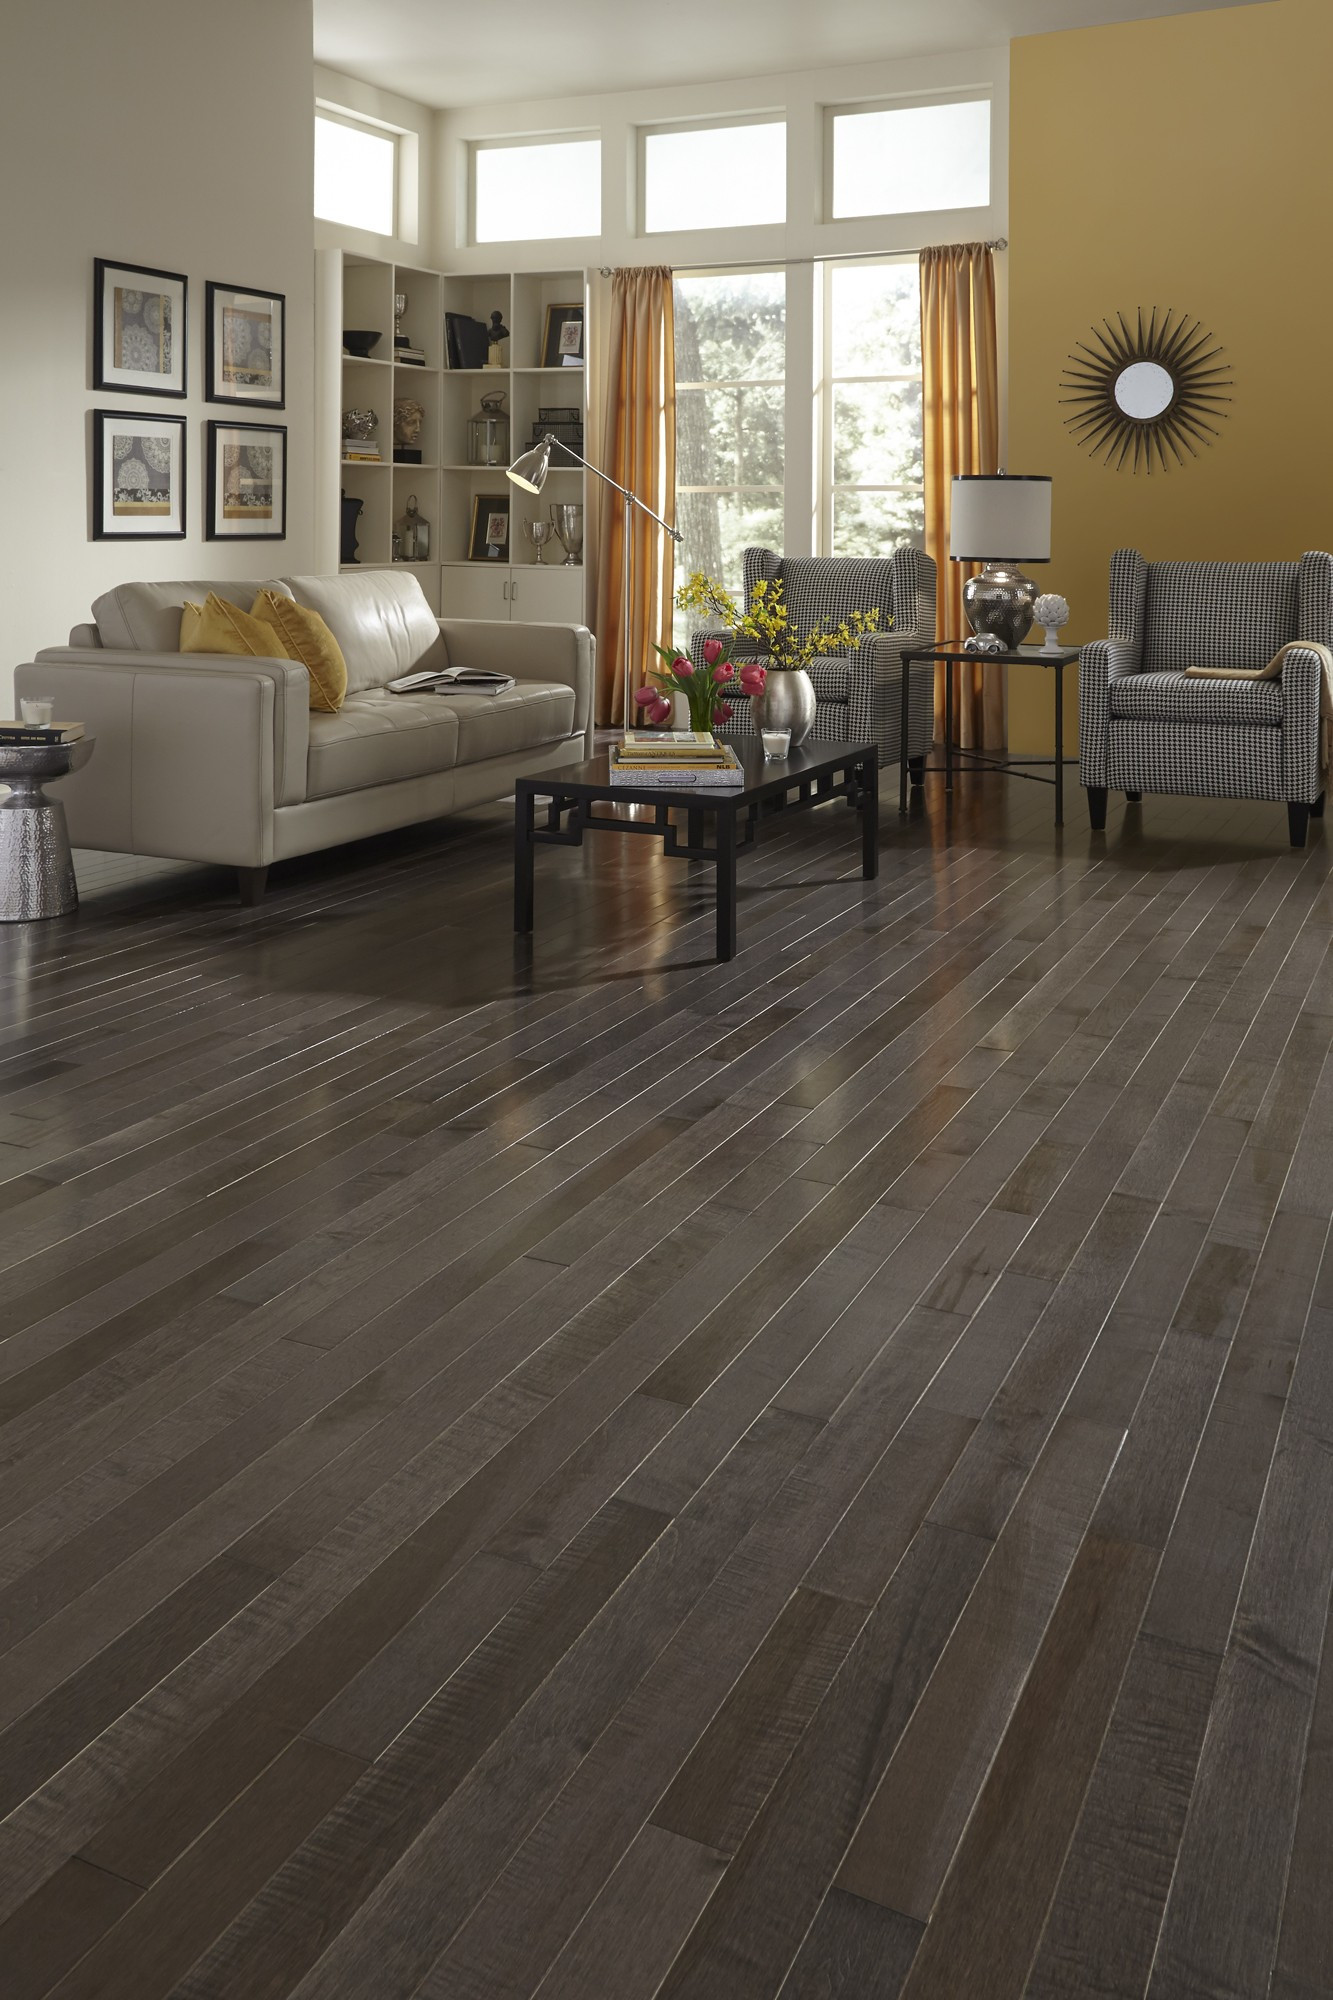 17 Recommended Professional Hardwood Floor Cleaning Cost 2024 free download professional hardwood floor cleaning cost of 15 elegant how much is hardwood flooring pics dizpos com pertaining to how much is hardwood flooring awesome august s top floors social gallery o